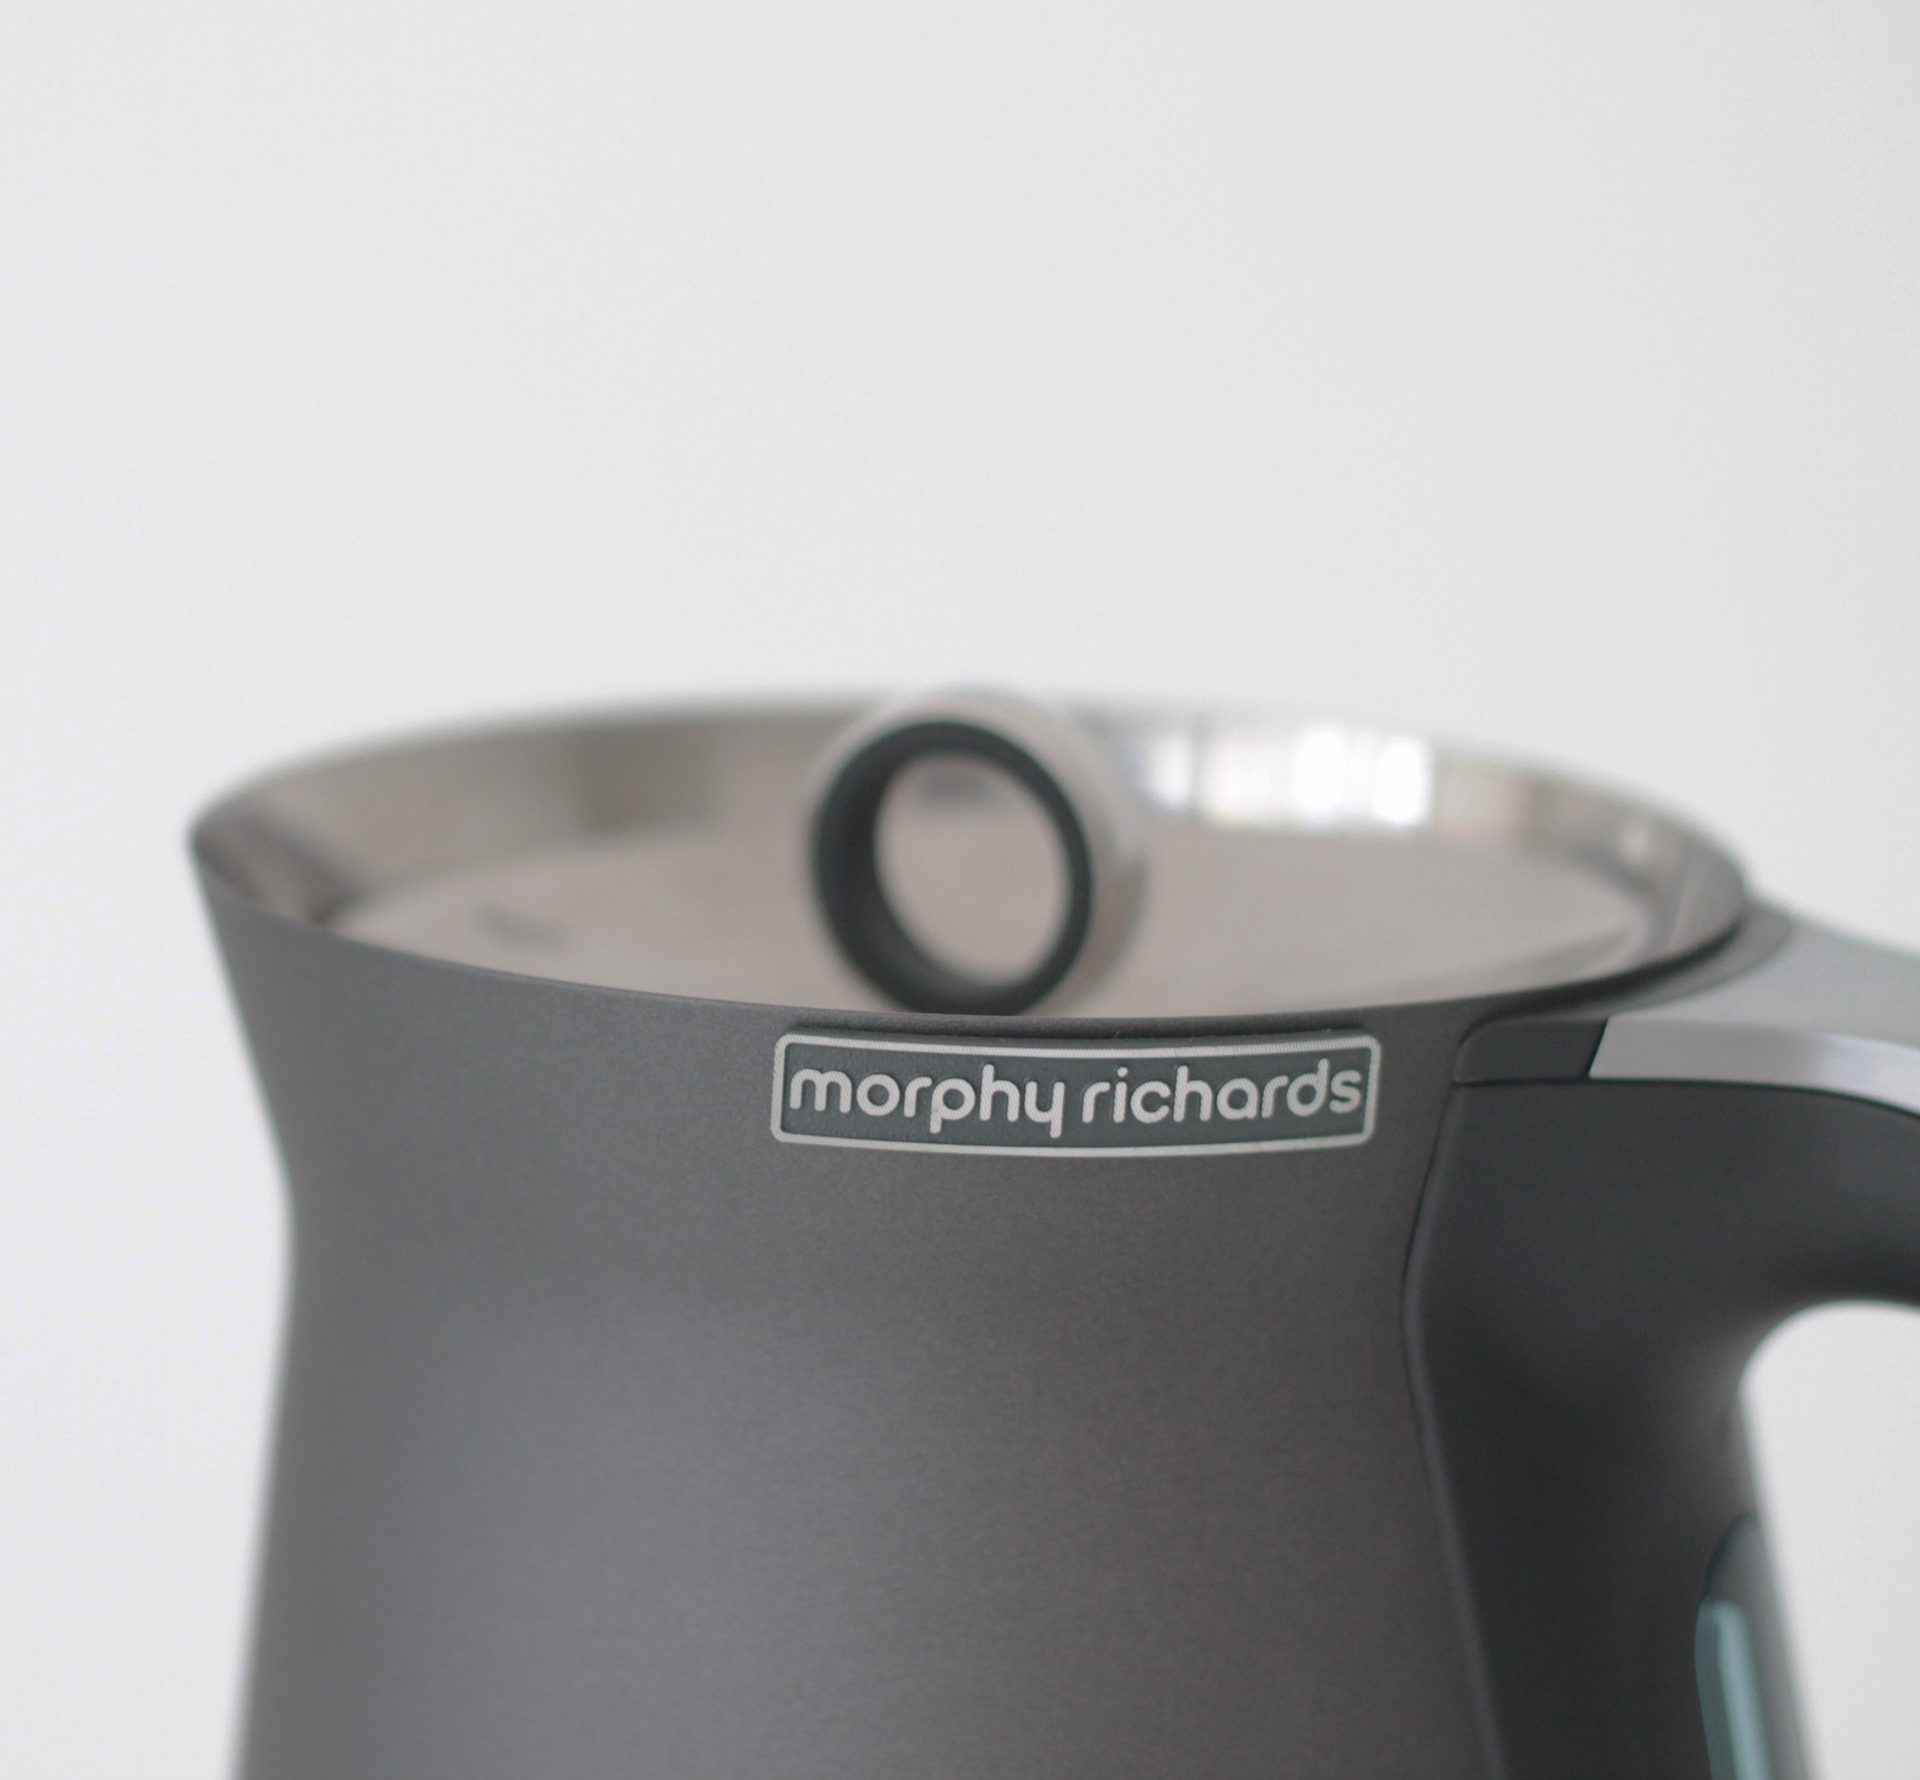 The signature Ring lid pull was a central element from the product brand language we designed for Morphy Richards